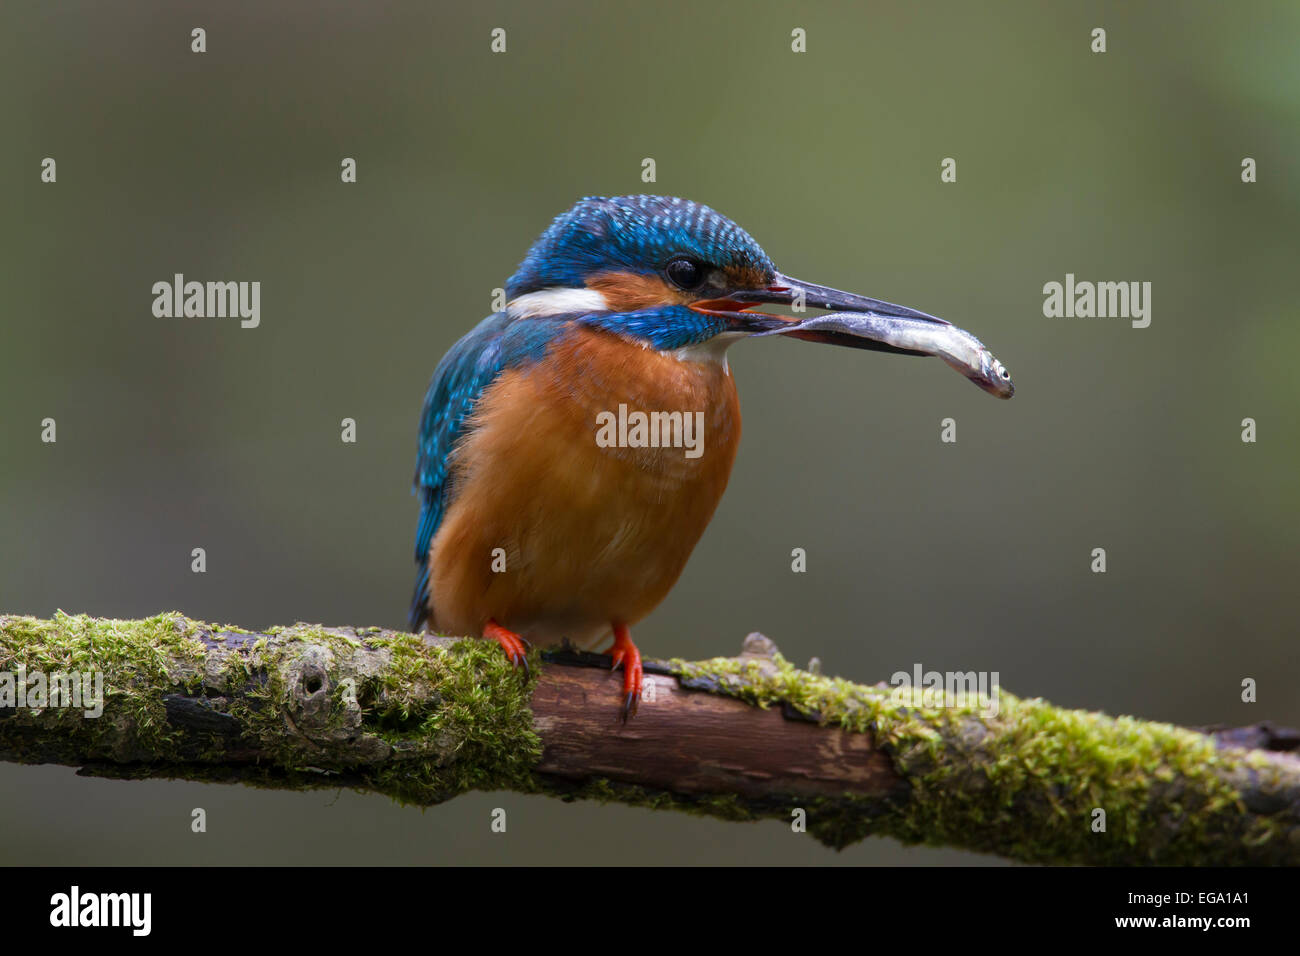 Common kingfisher / Eurasian kingfisher (Alcedo atthis) perched on branch with caught fish in beak Stock Photo